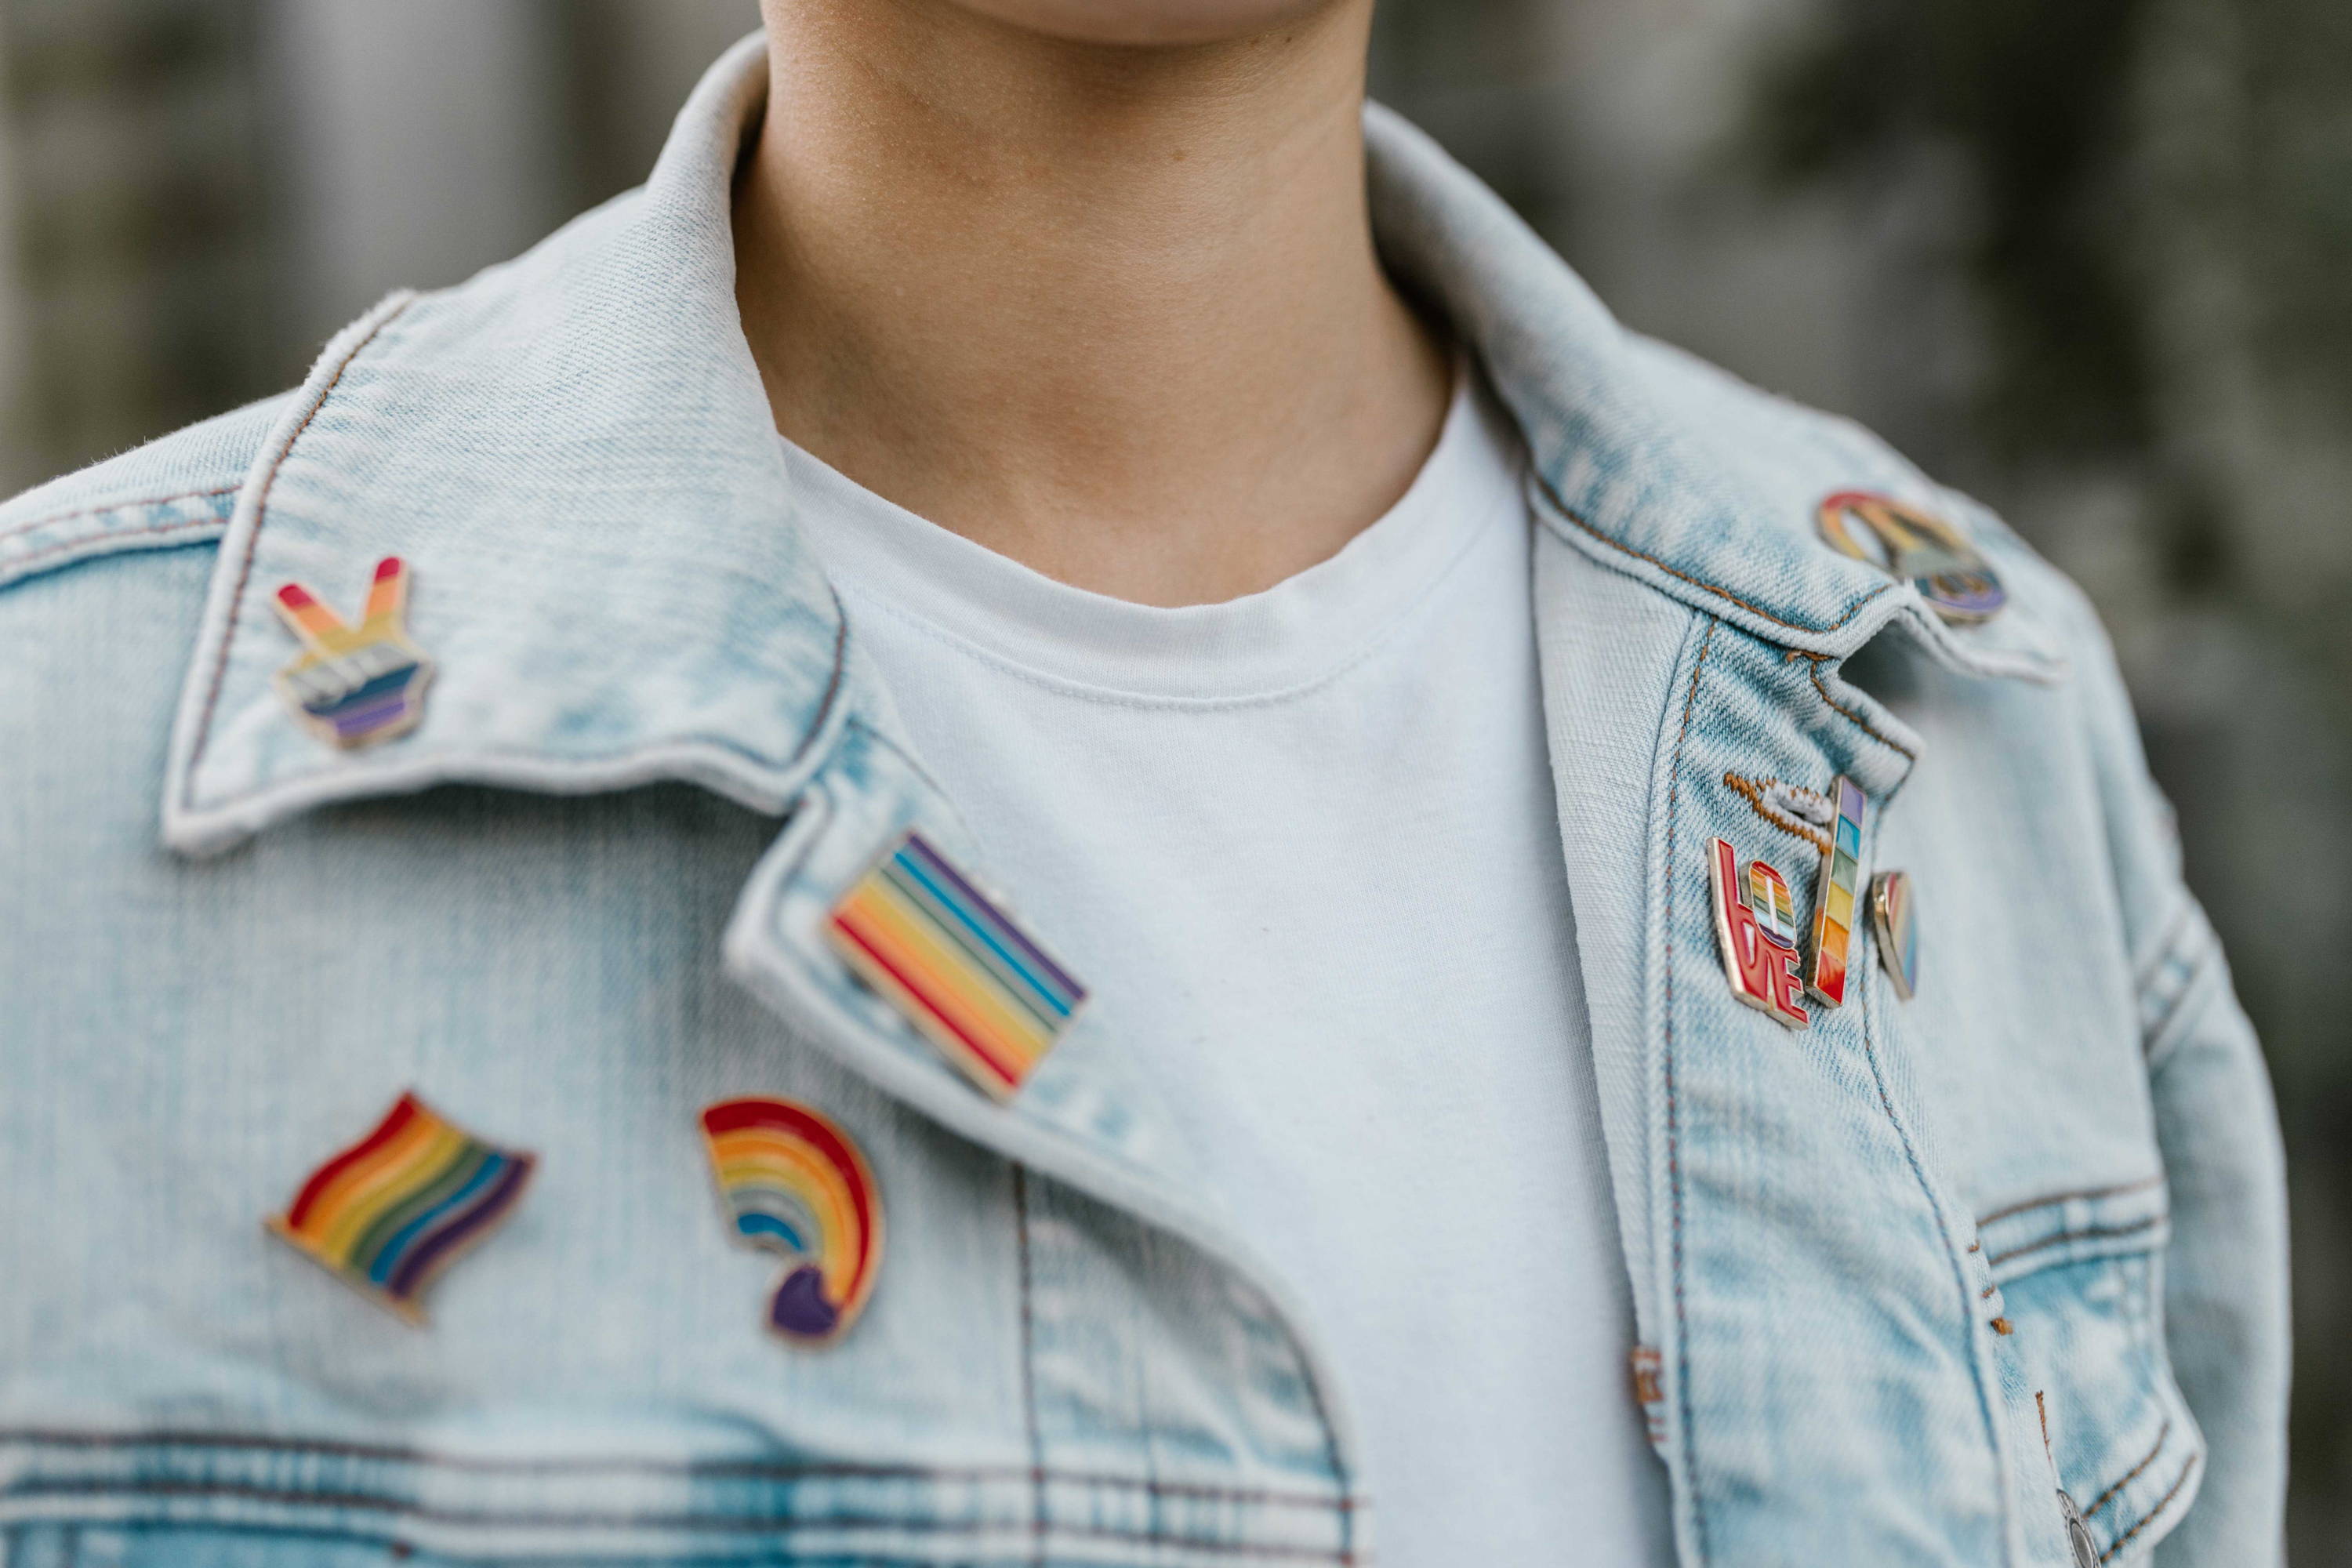 Plastic free pride parades are an opportunity to wear sustainable pridewear